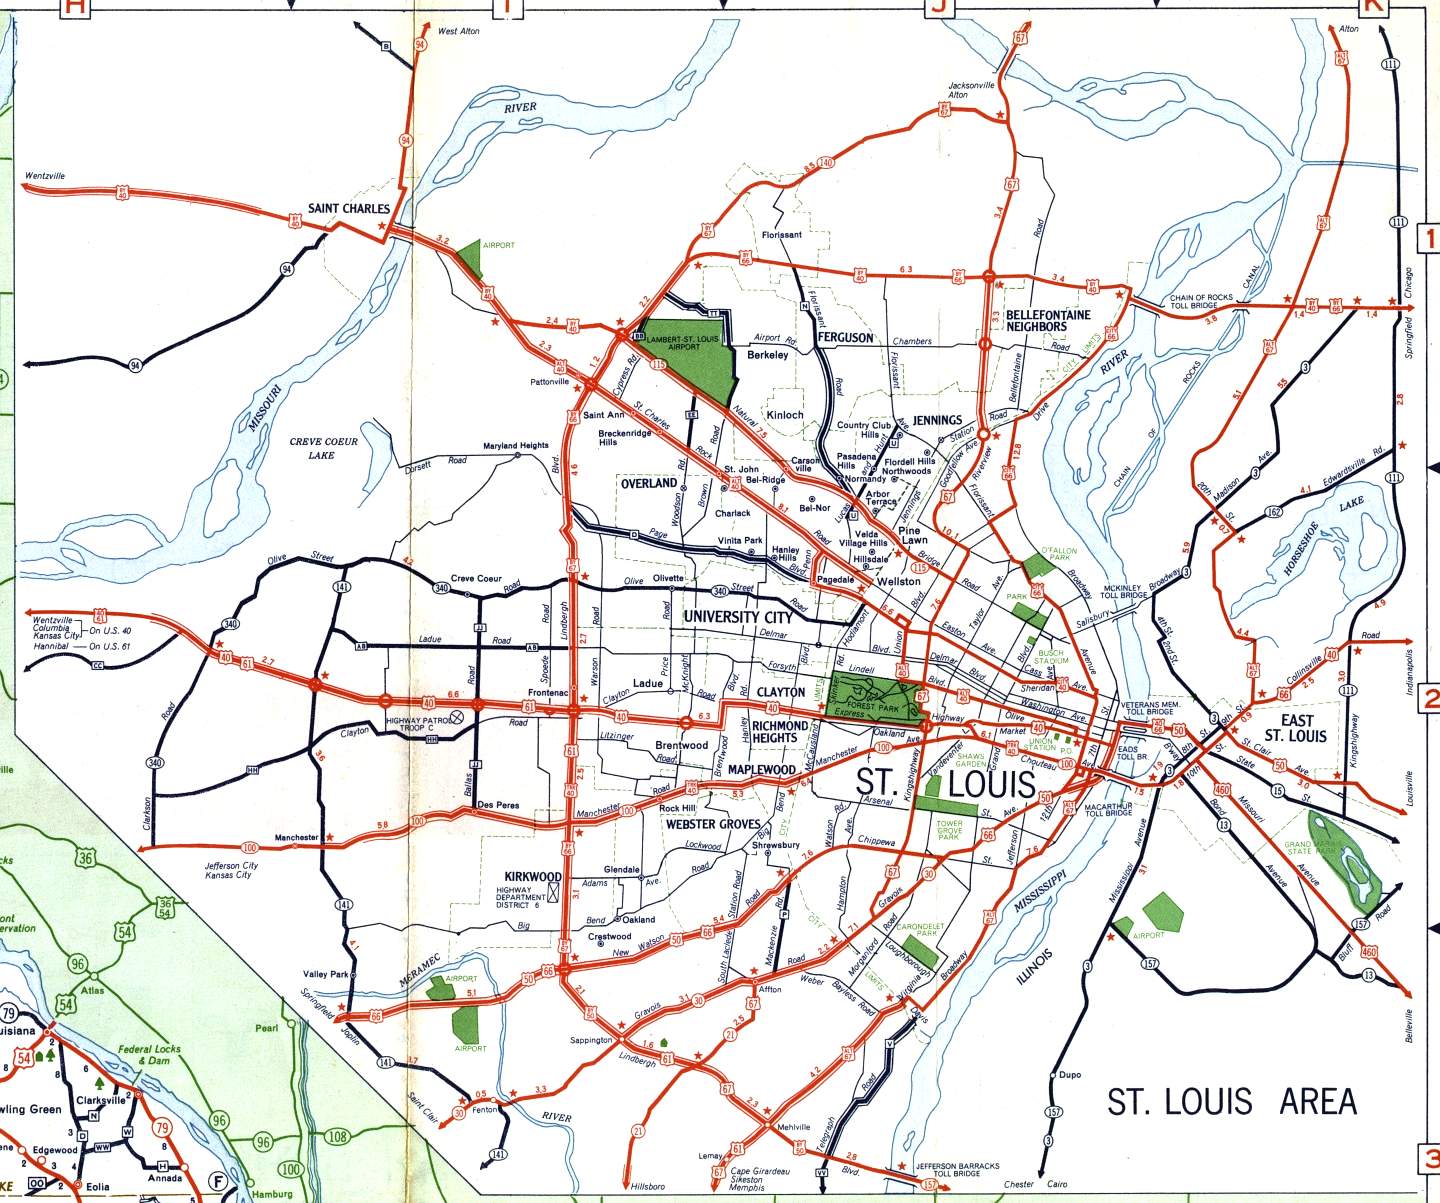 Inset map for St. Louis, Mo. (1958)